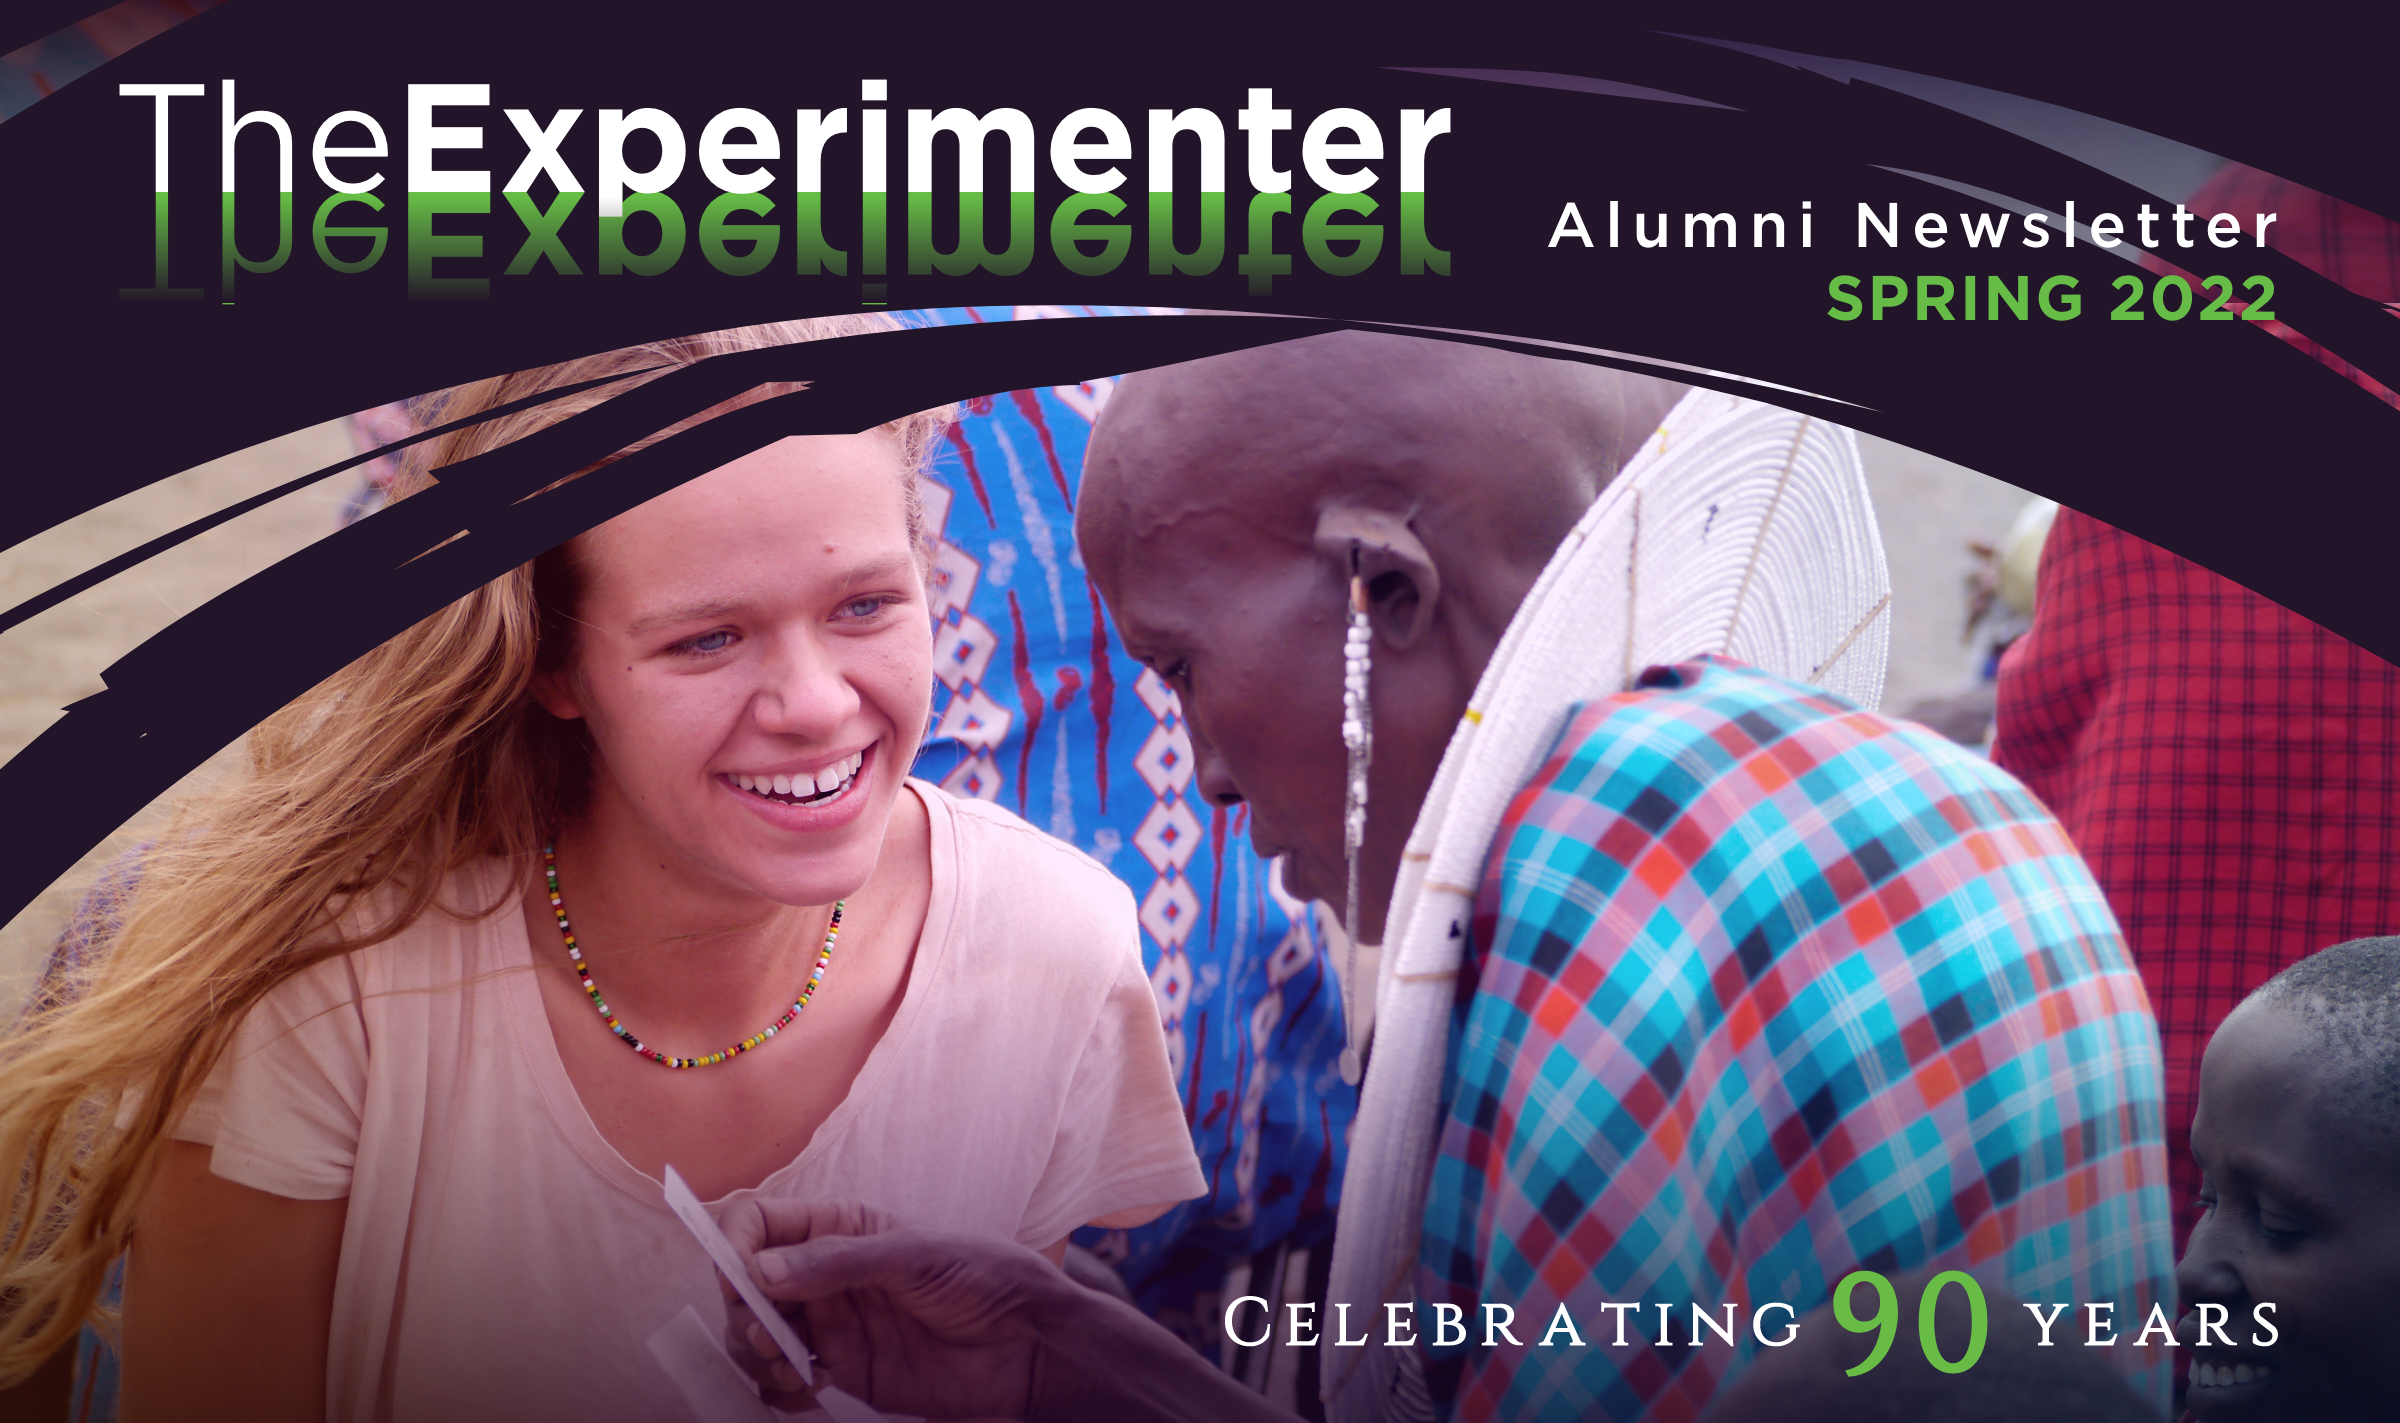 TheExperimenter cover image, student talking and smiling with Maasai tribe member